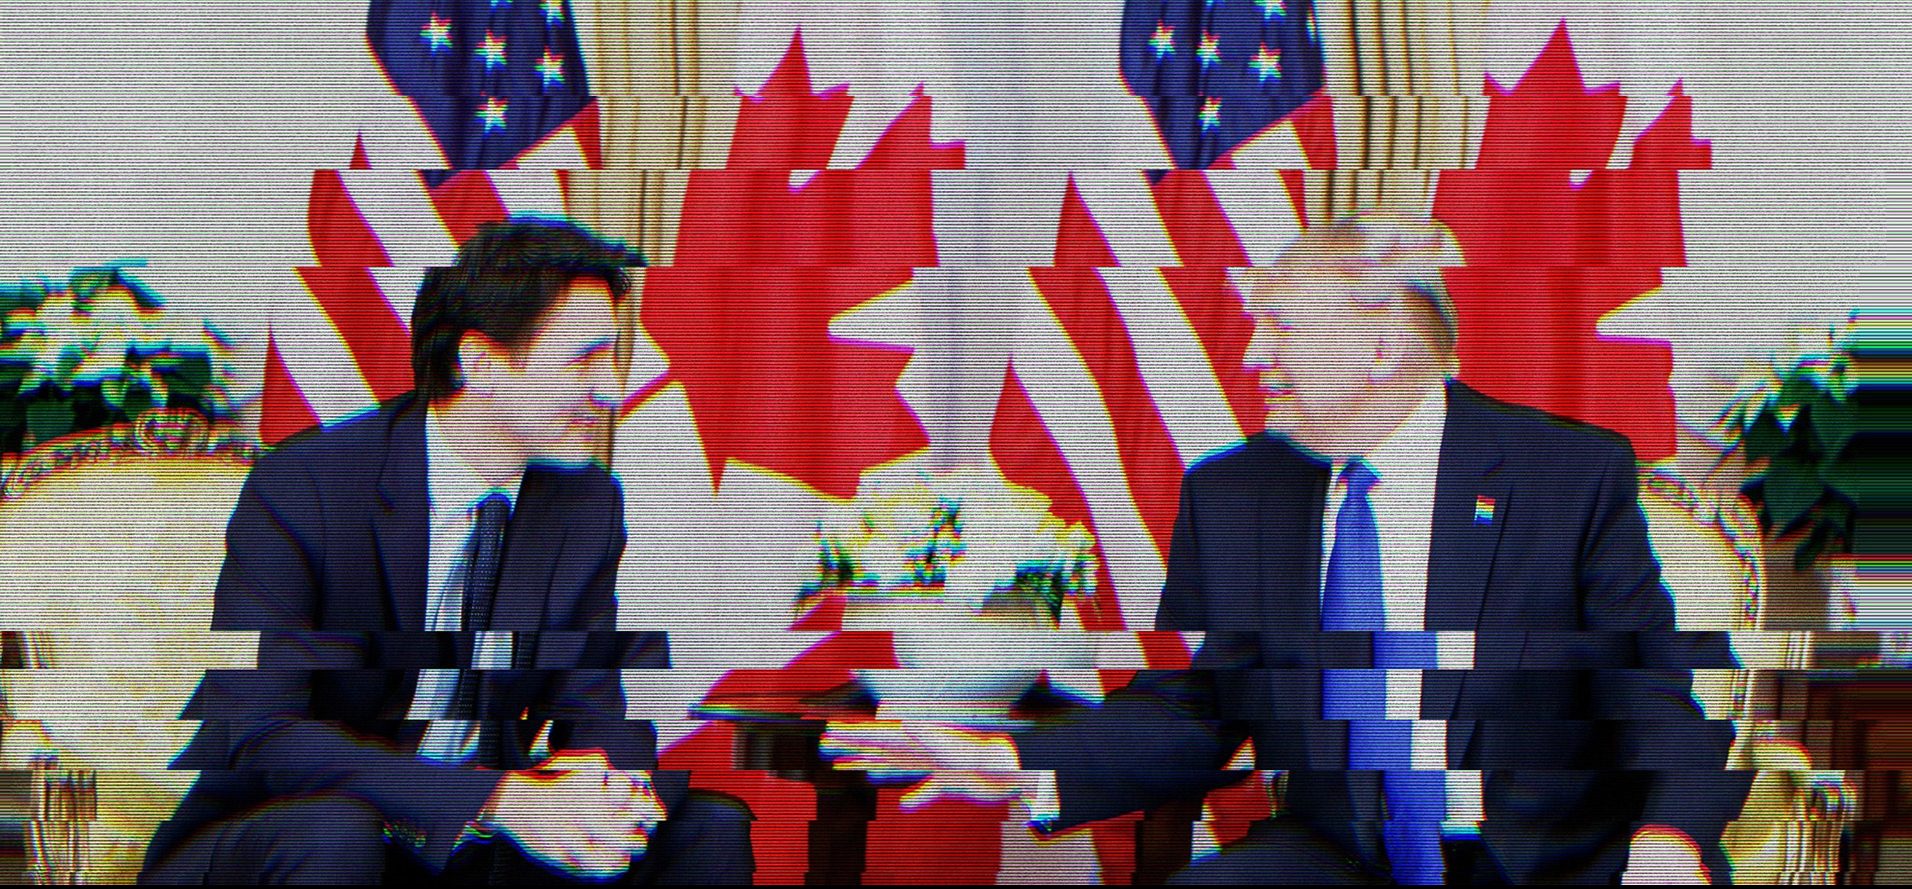 Staticky image of Prime Minister Justin Trudeau and President Donald Trump in discussion, seated in front of large, alternating Canadian and American flags